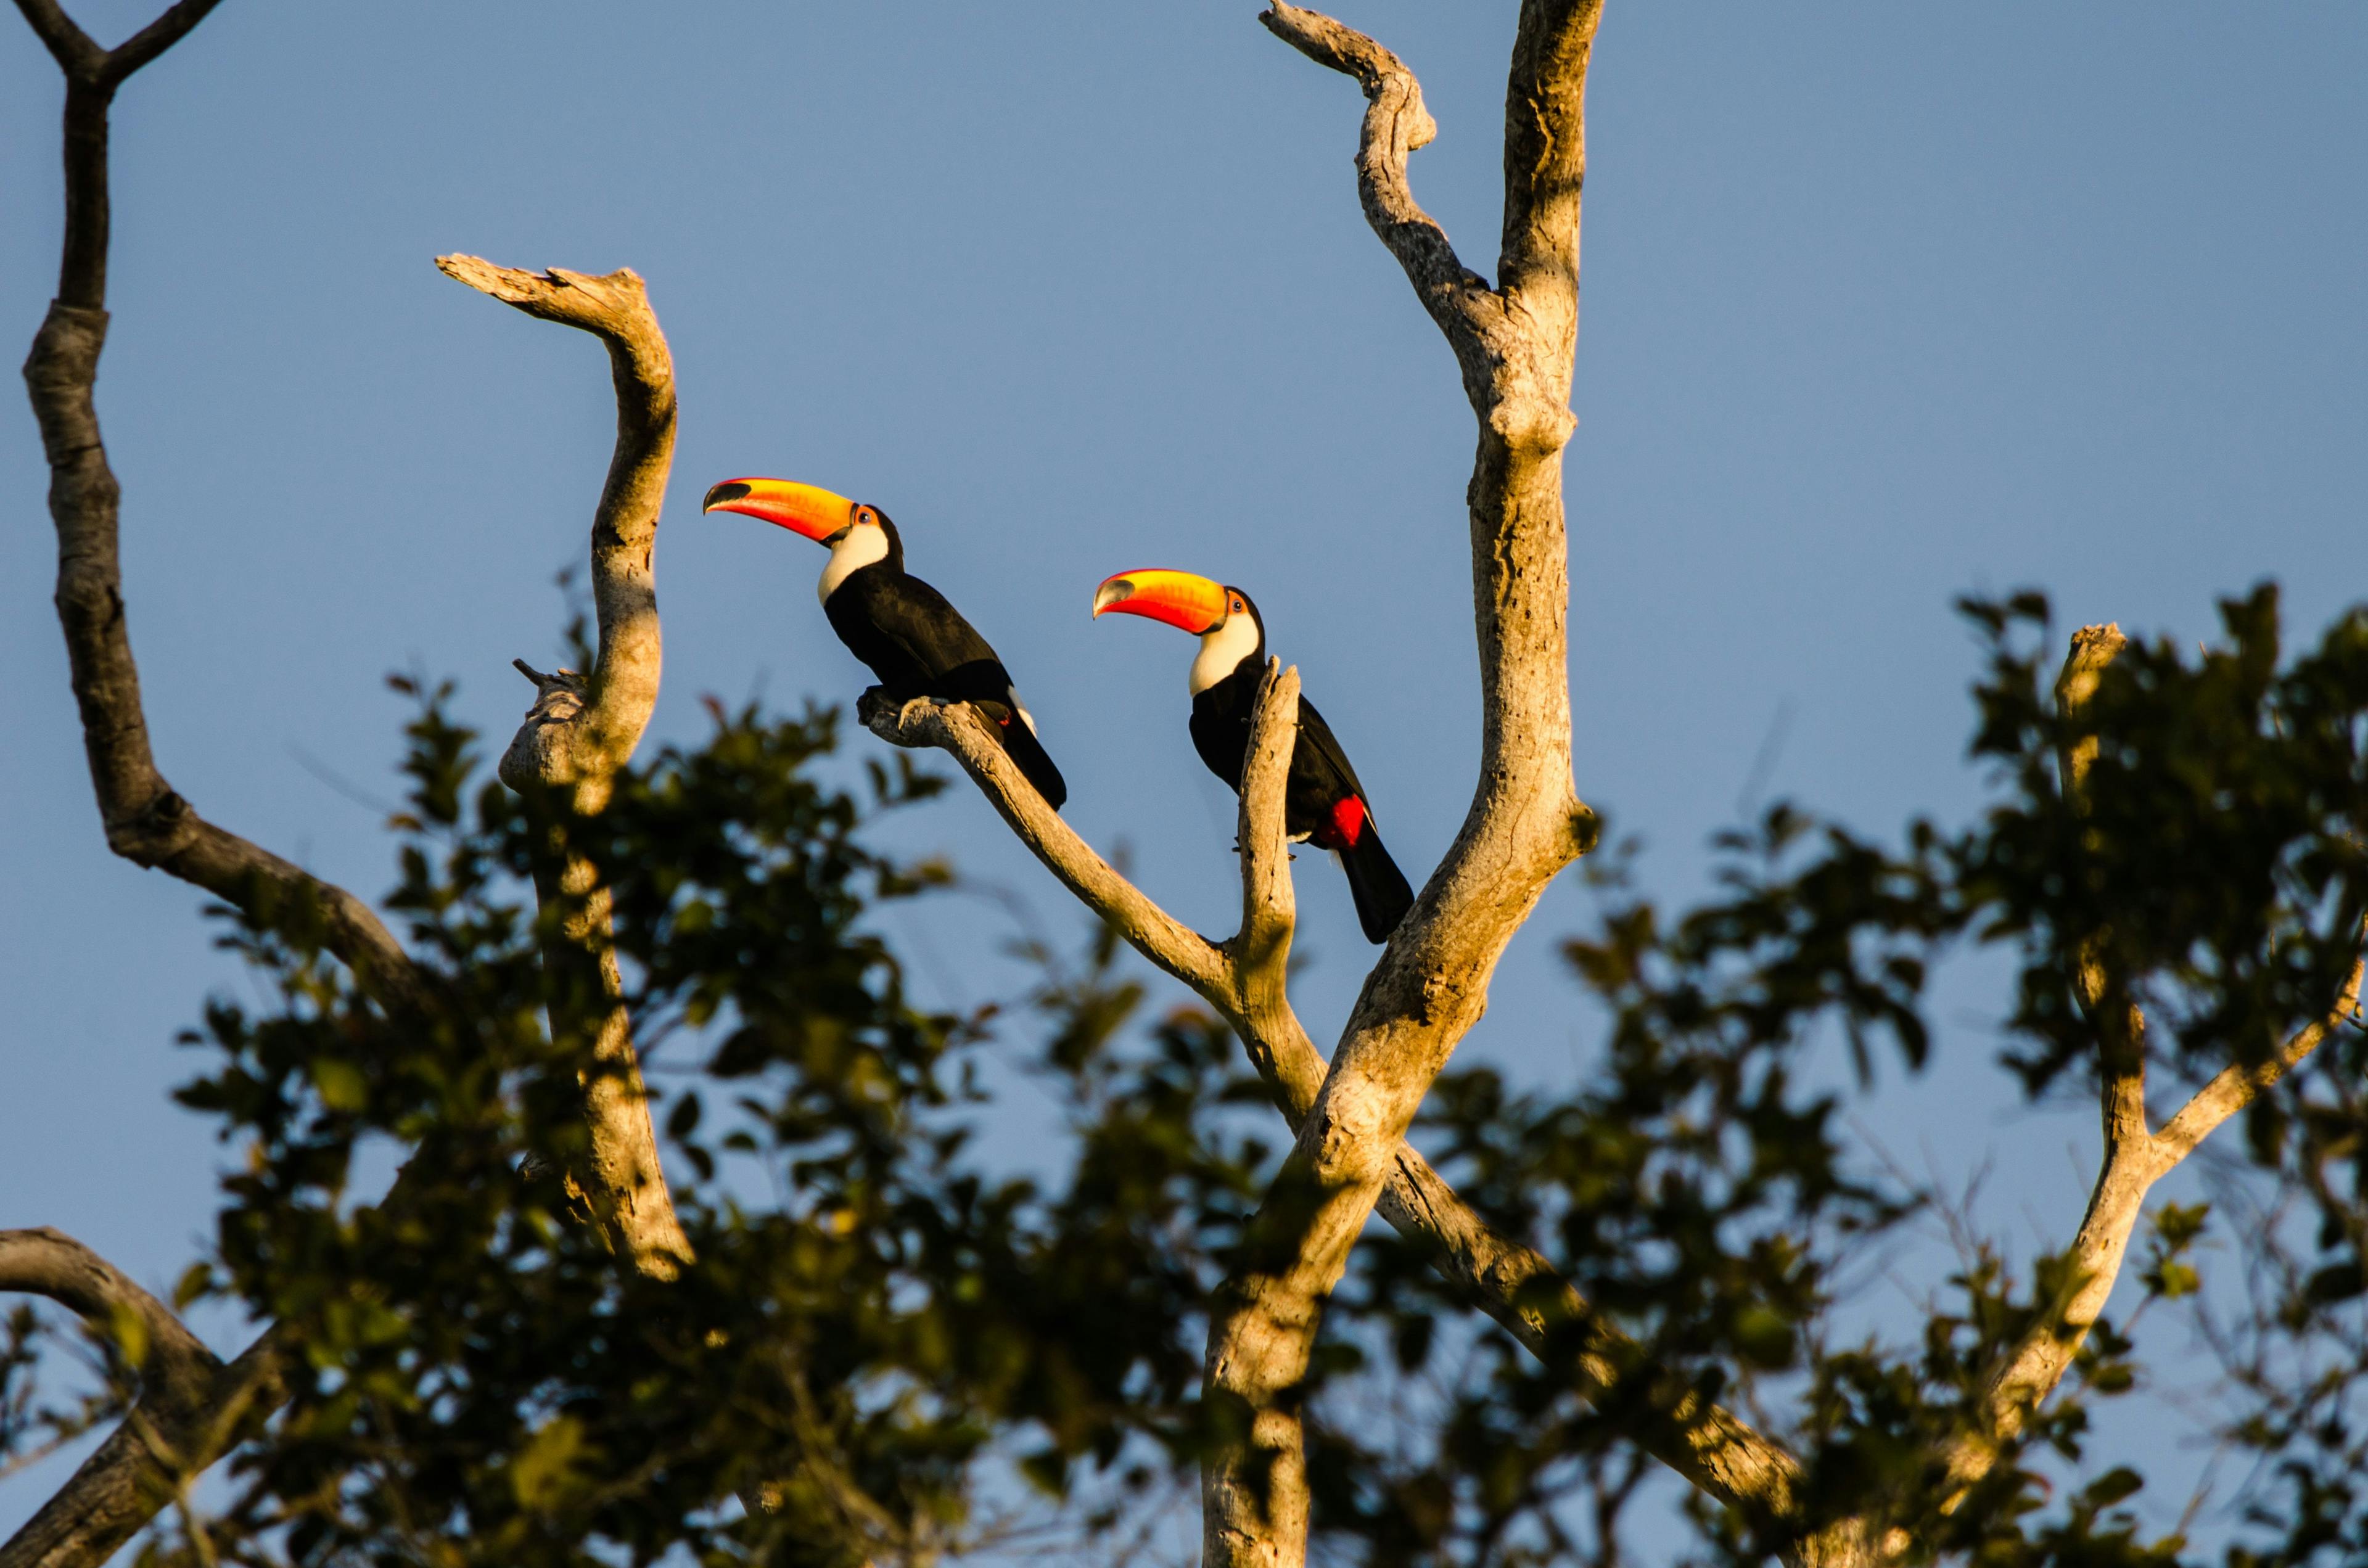 Colorful birds on a tree in Pantanal, Brazil.